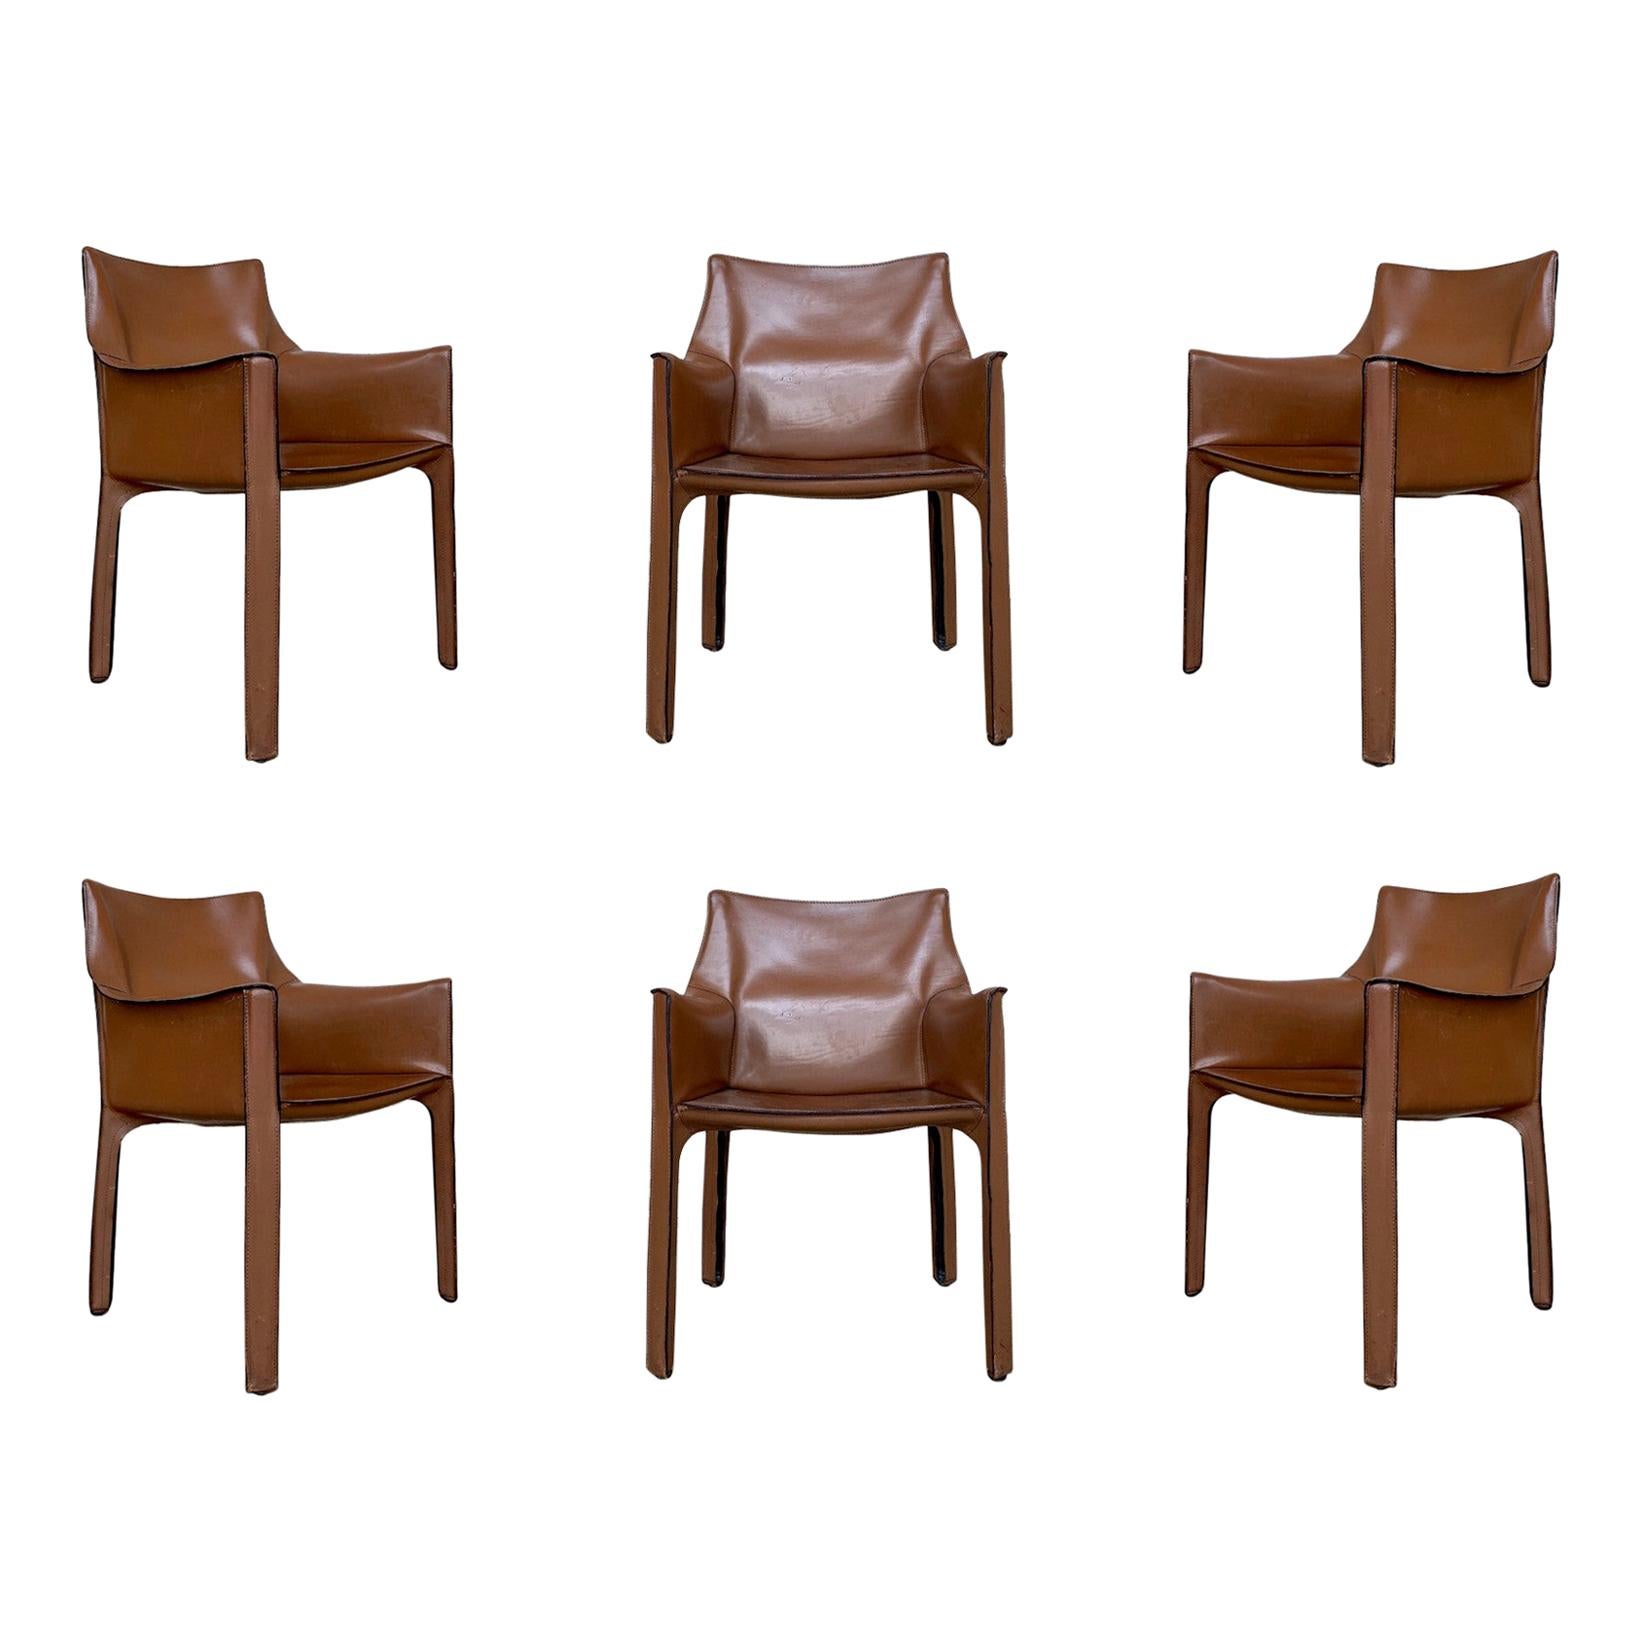 Mario Bellini "CAB" Leather Armchairs for Cassina, 1977, Set of 6